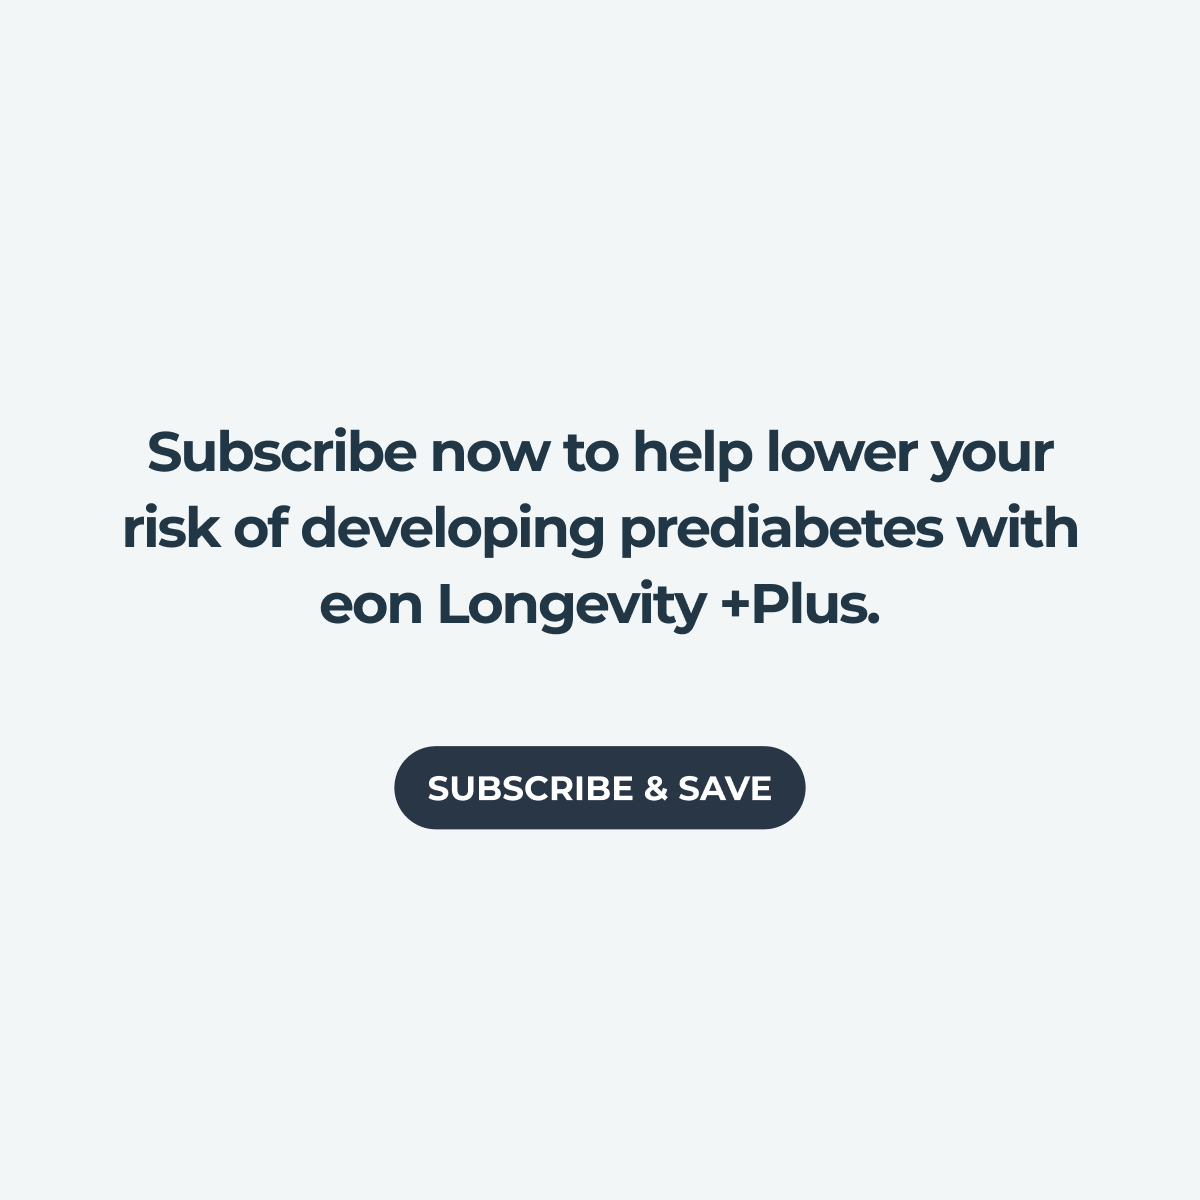 Subscribe now to help lower your risk of developing prediabetes with eon Longevity +Plus. Subscribe & Save